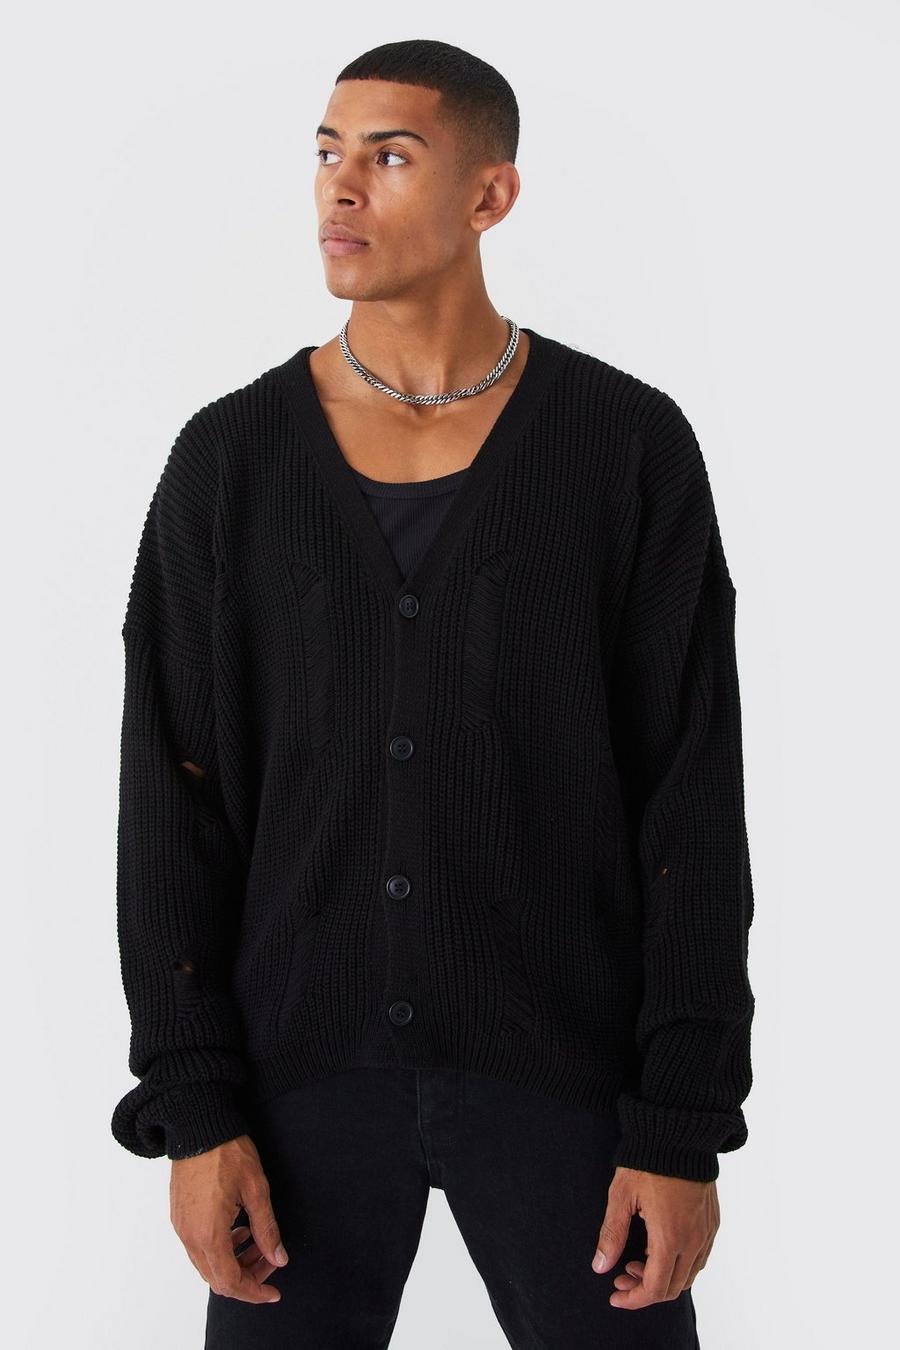 Black Boxy Fit Distressed Knitted Cardigan